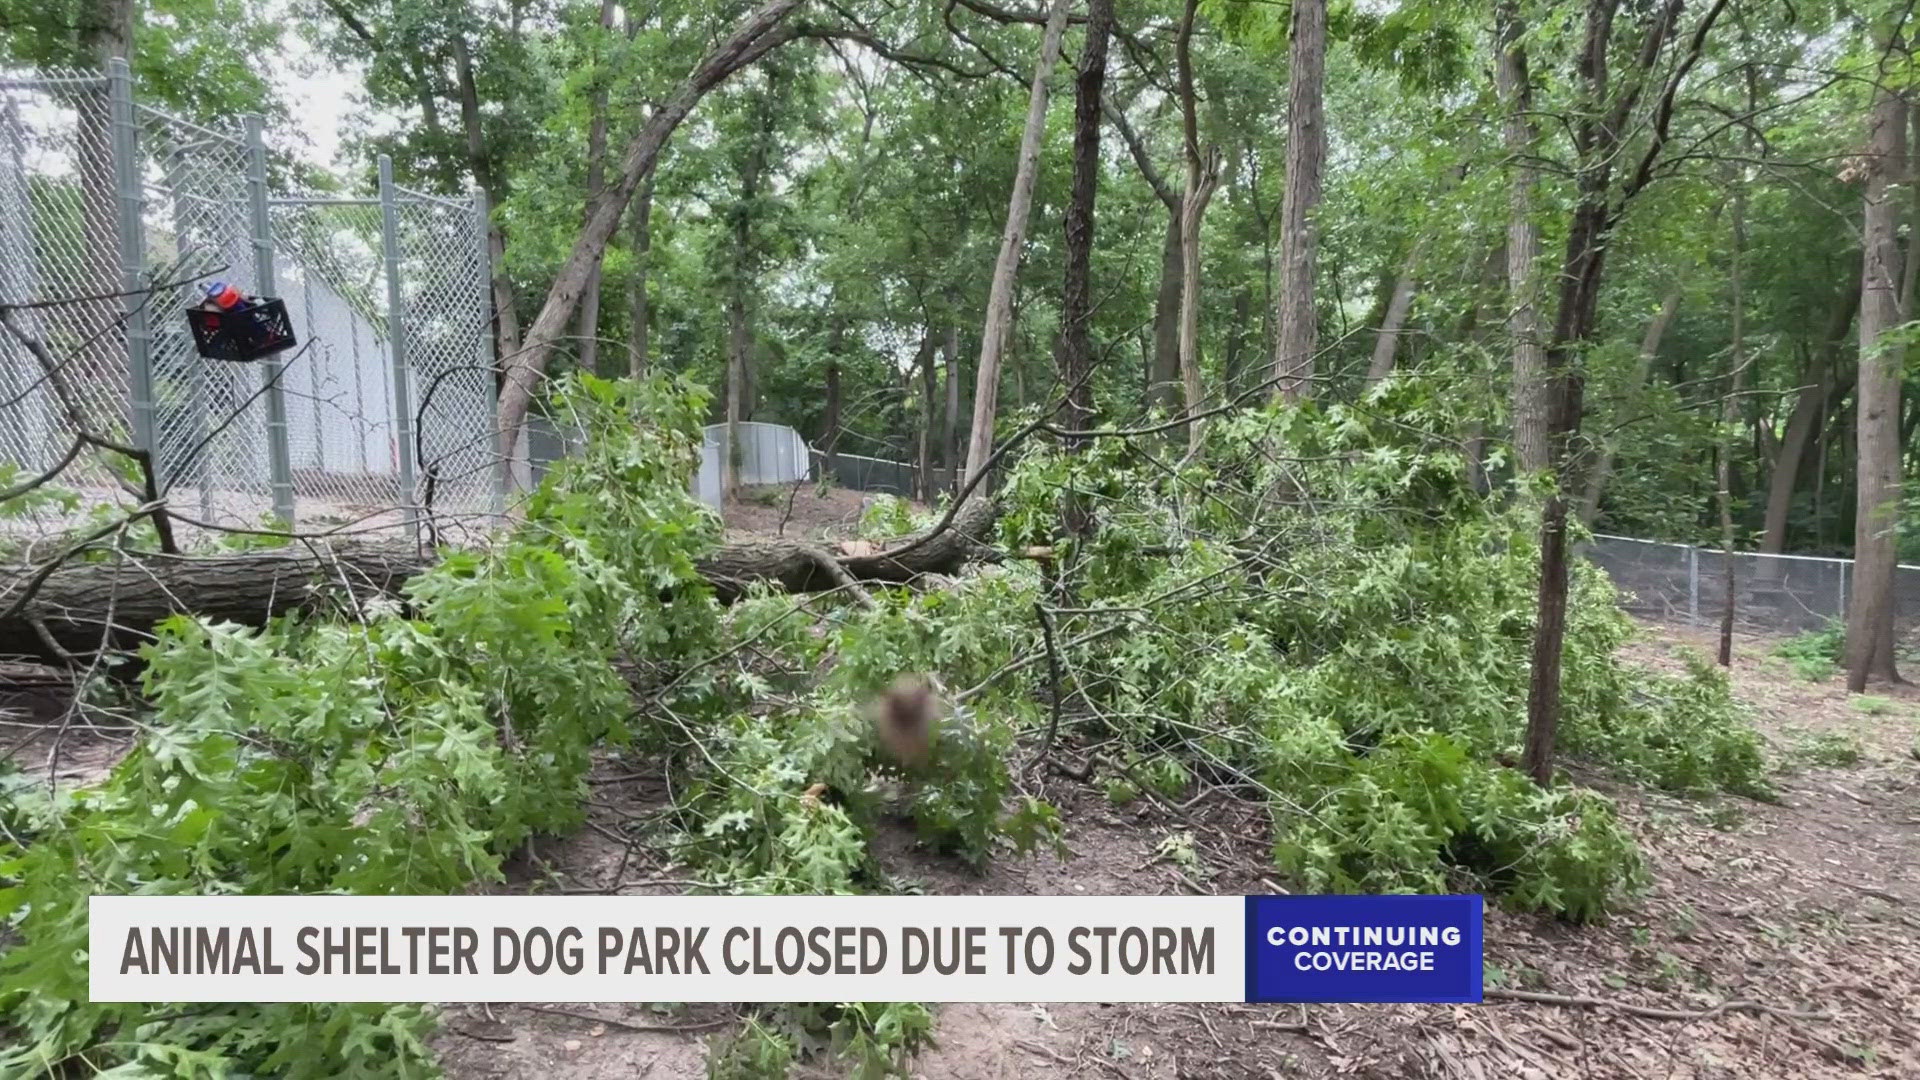 The park is temporarily closed until the fence can be repaired.